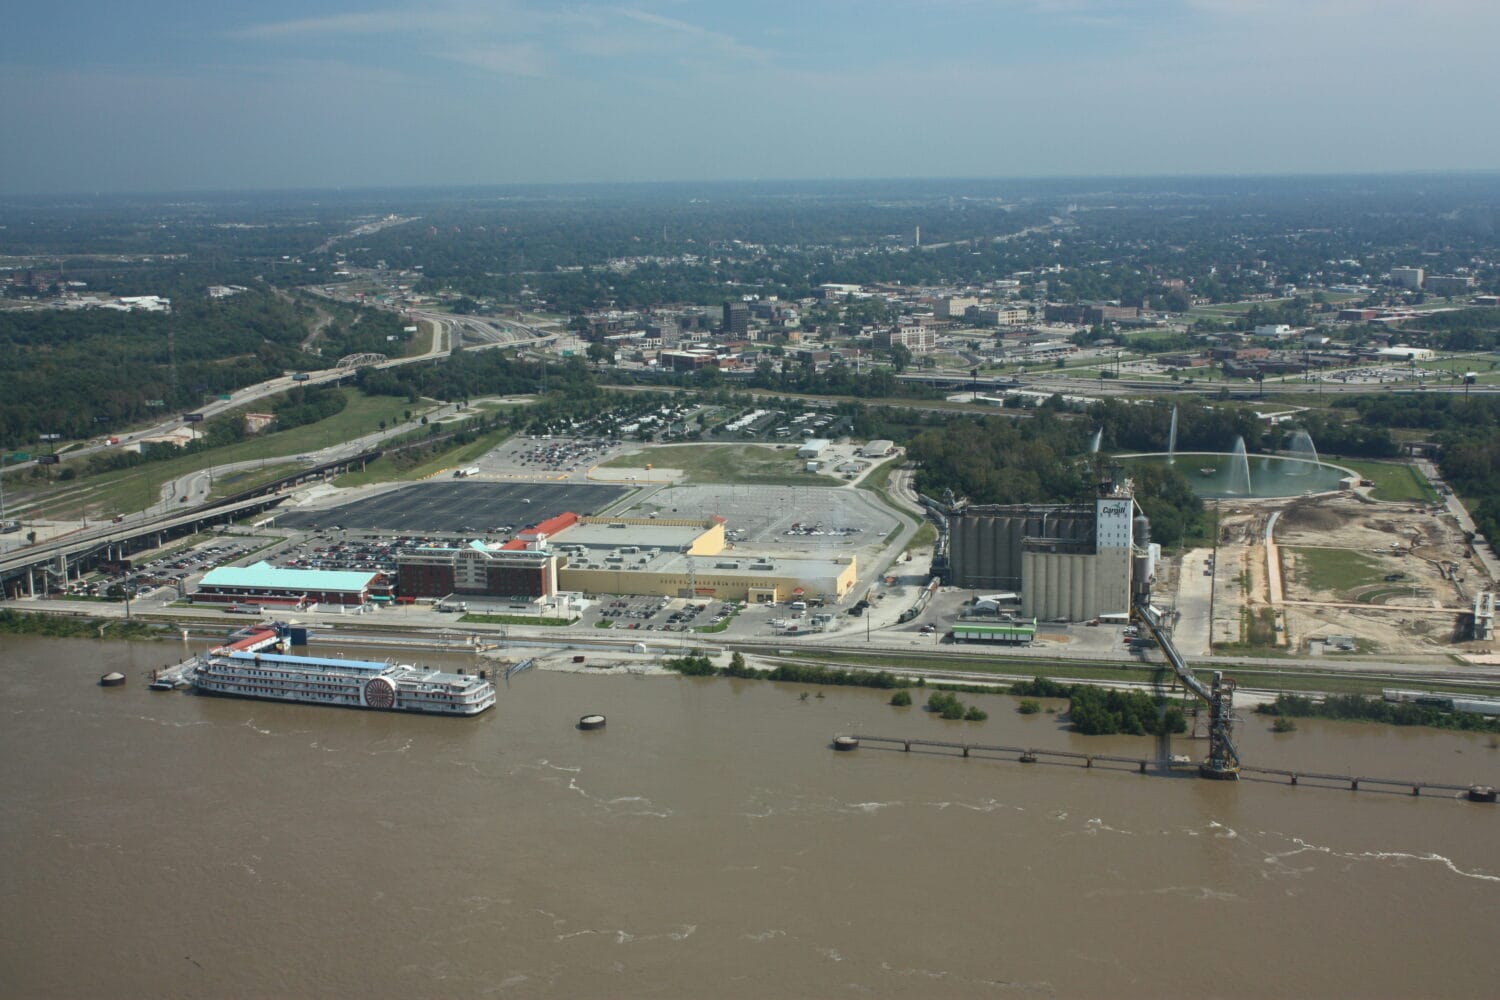 Looking towards East St. Louis and the mississippi river flooding from the top of the st louis arch in St. Louis, missouri